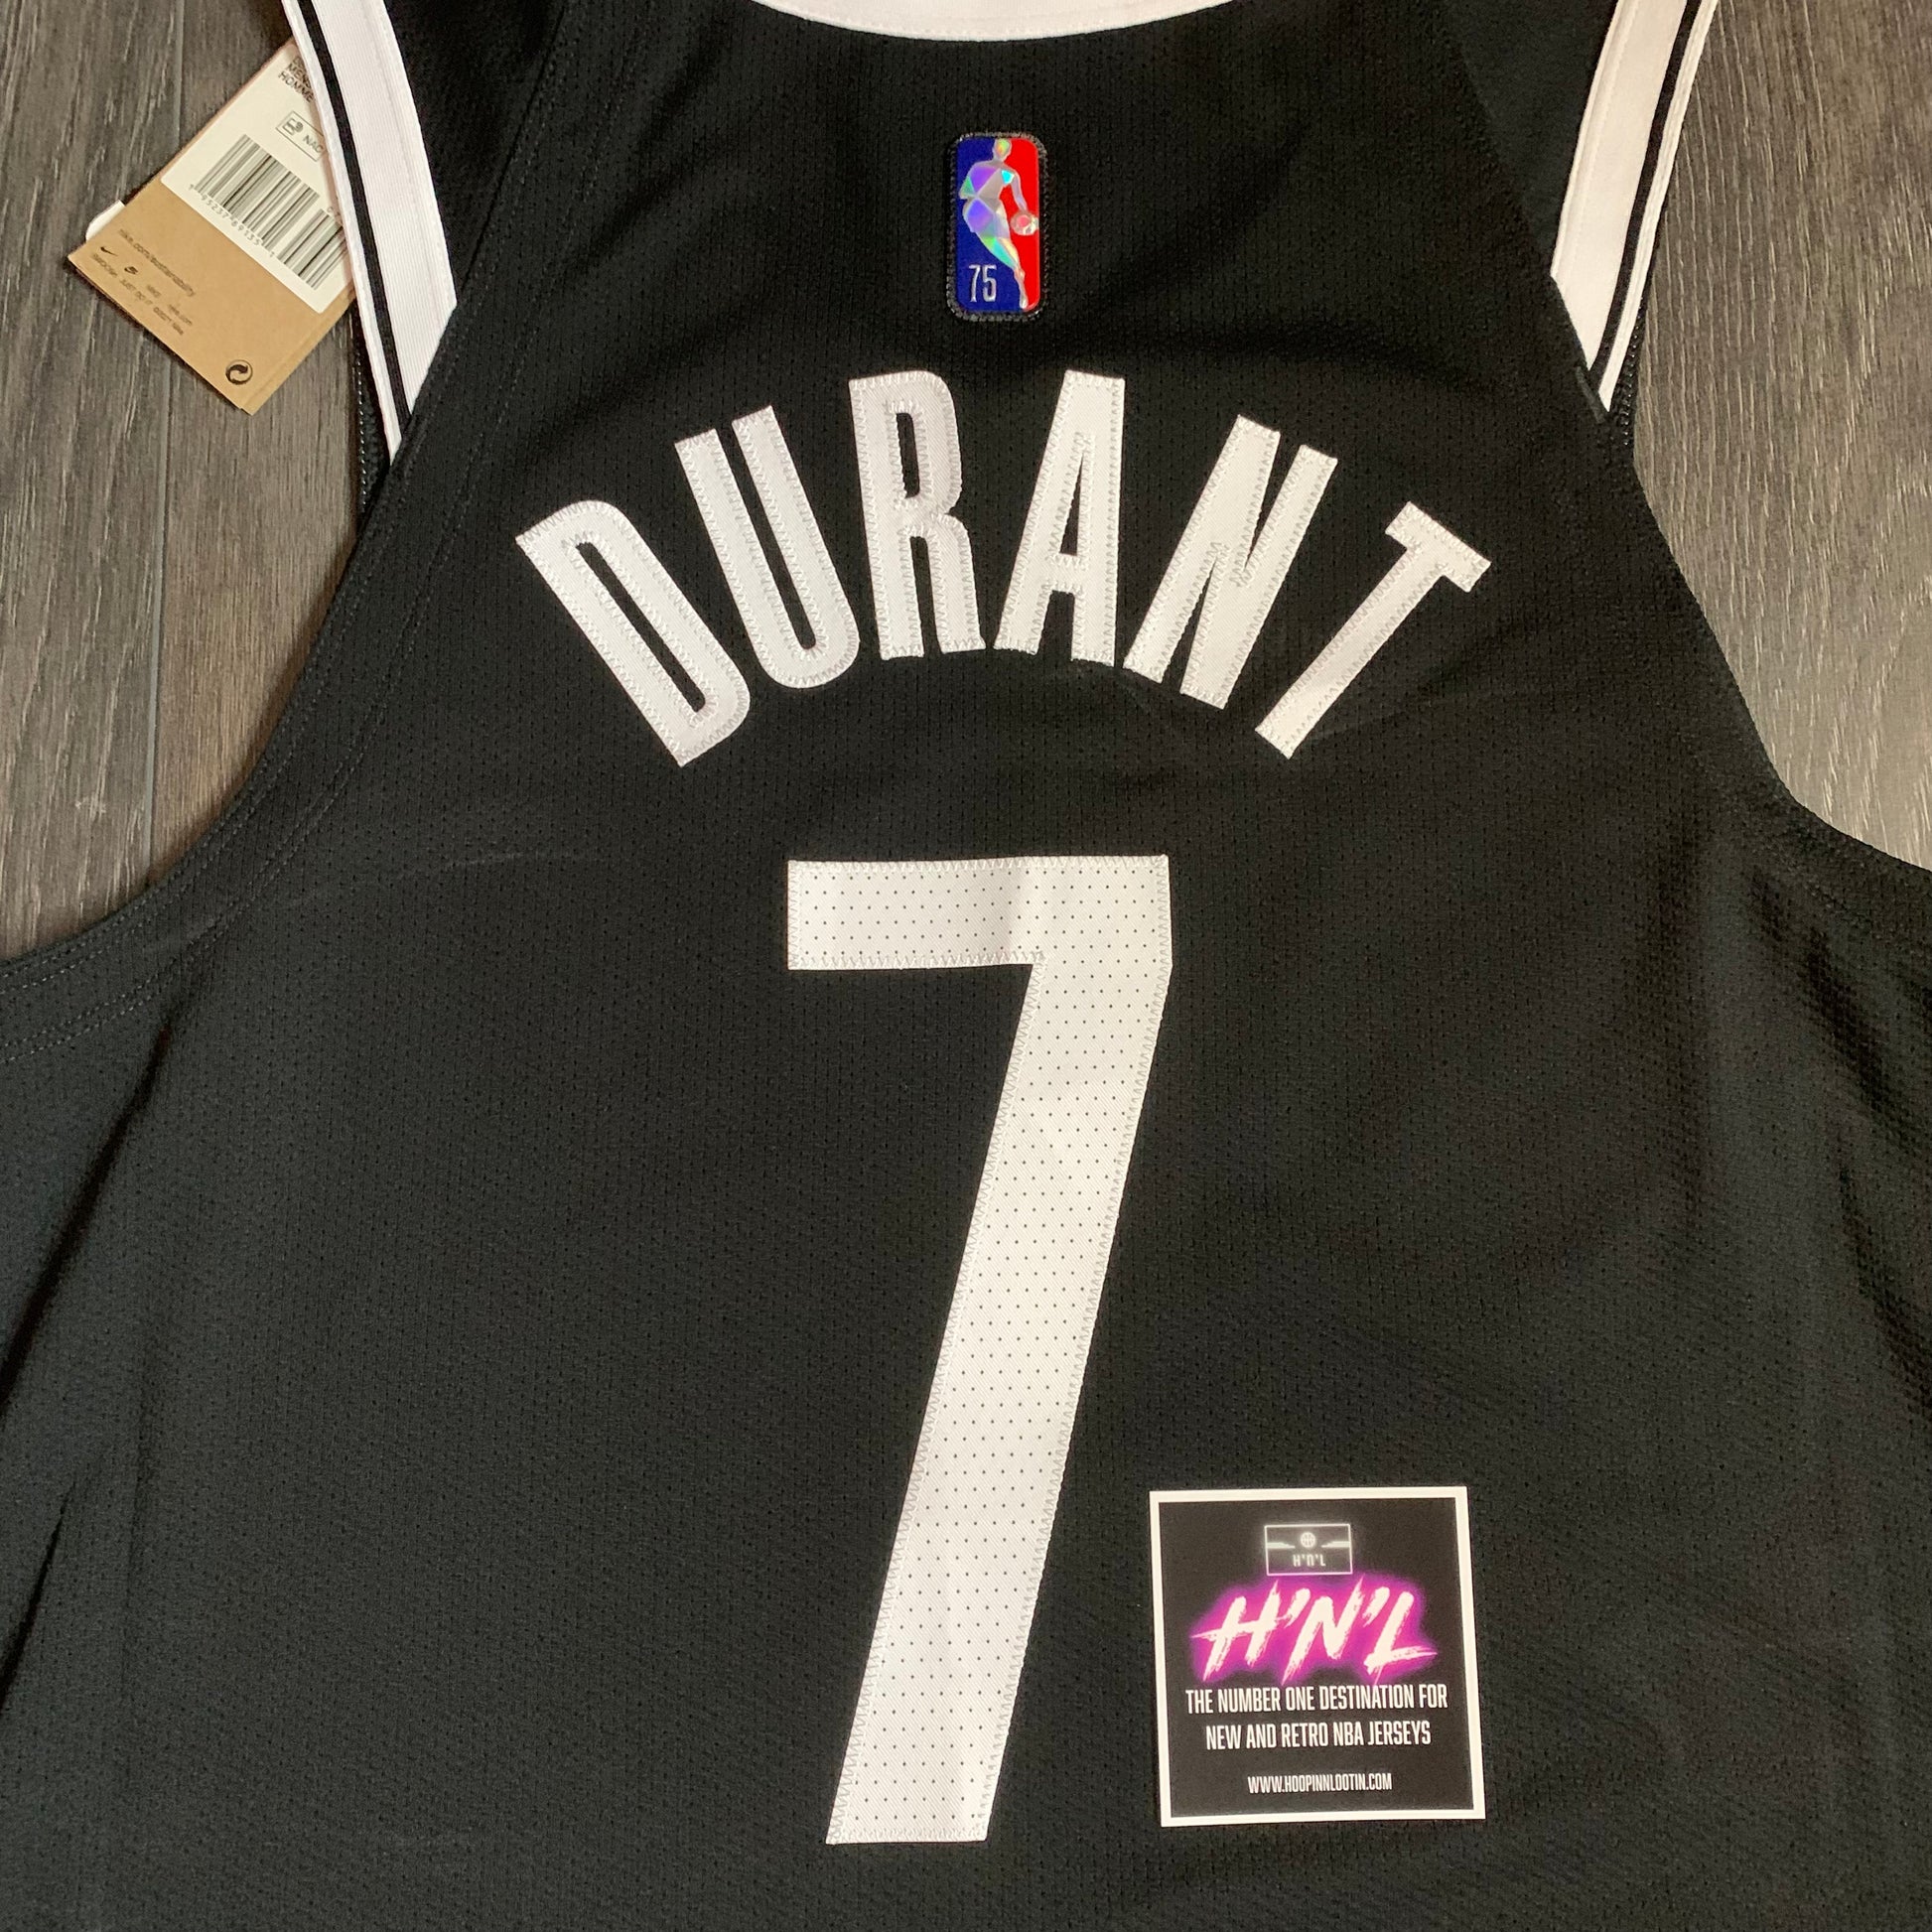 Nike NBA Kevin Durant Brooklyn Nets Icon Edition Jersey Black